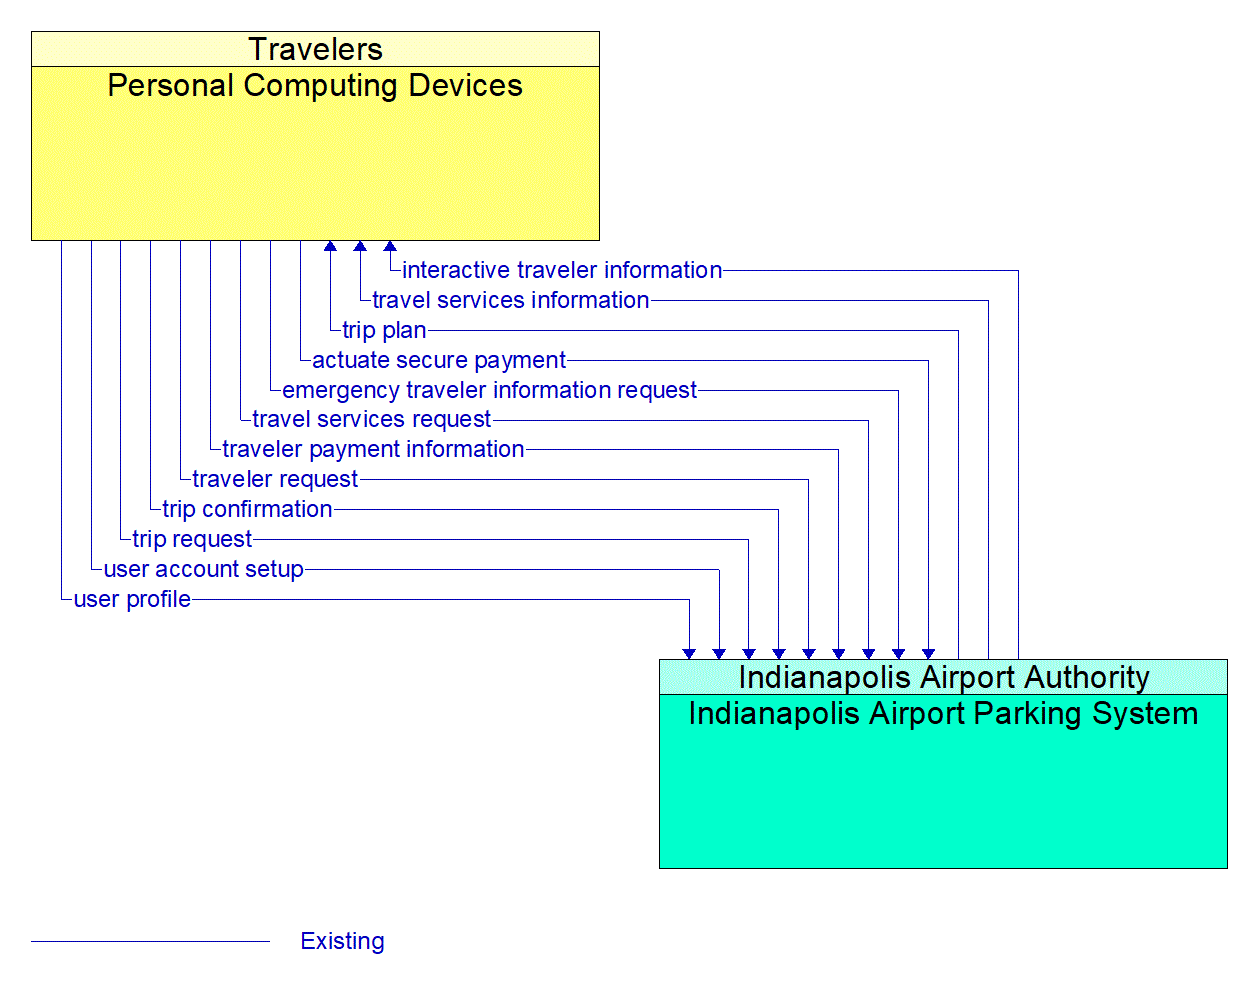 Architecture Flow Diagram: Indianapolis Airport Parking System <--> Personal Computing Devices